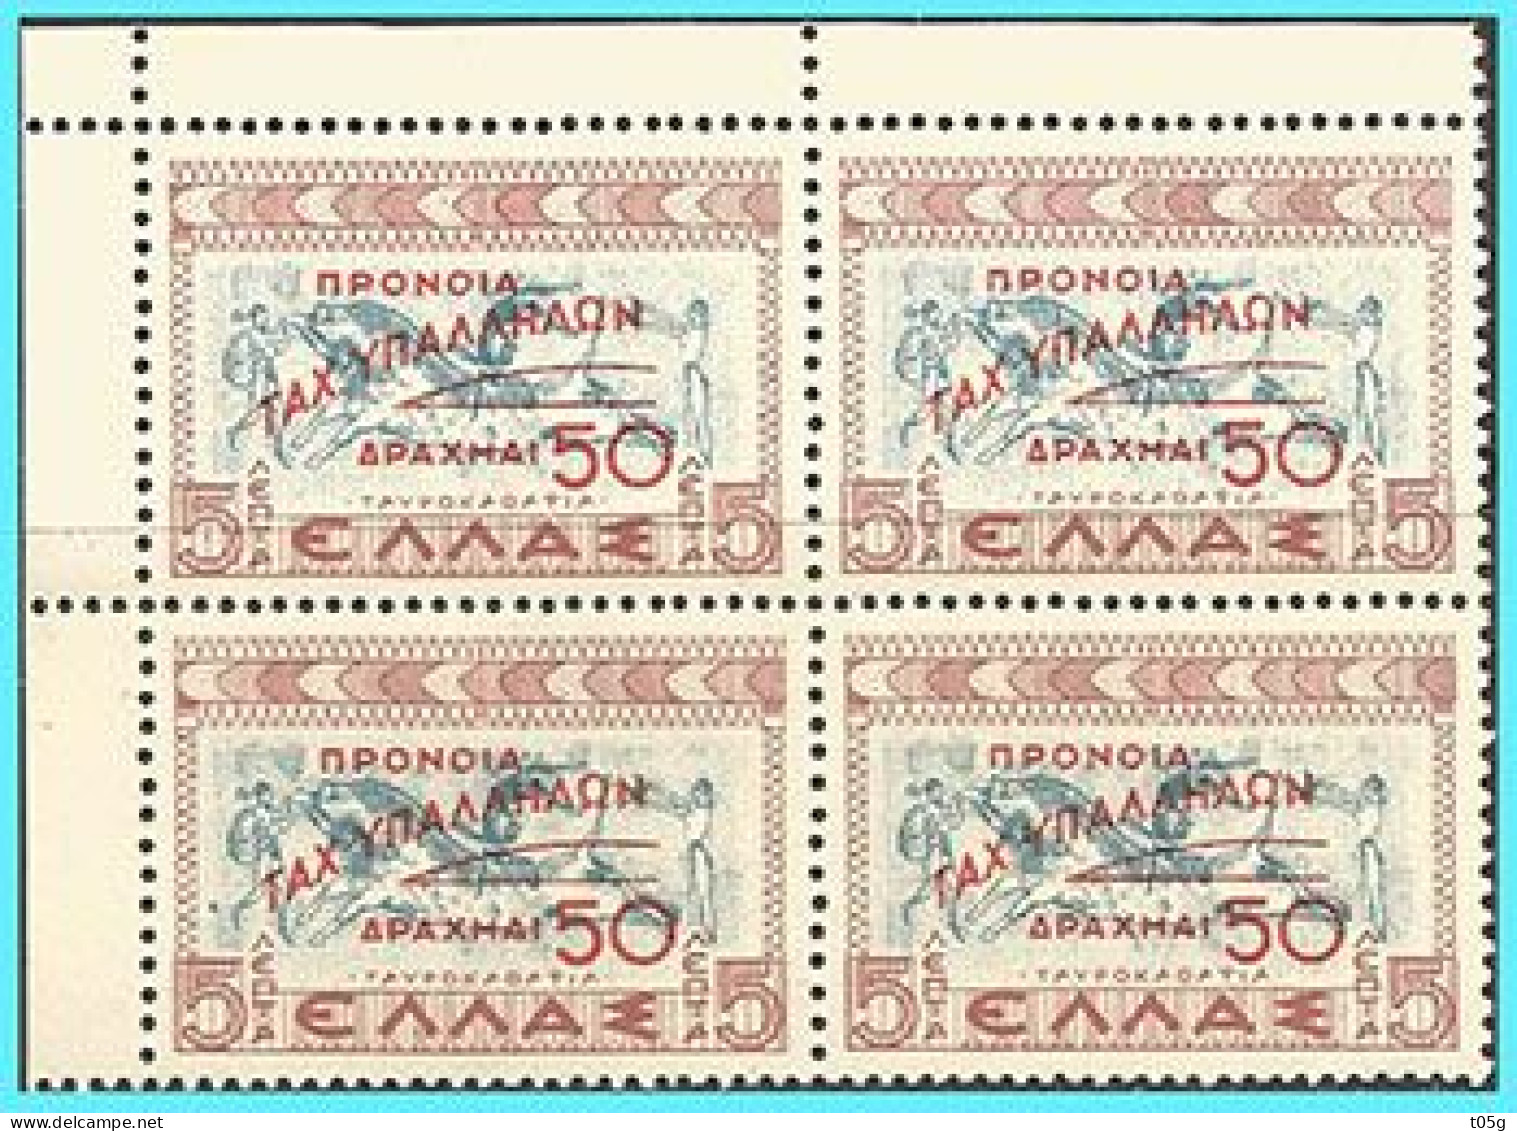 GREECE -GRECE- HELLAS 1951: 20L/ 5L Charity Stamps Block/4 Set Used - Charity Issues